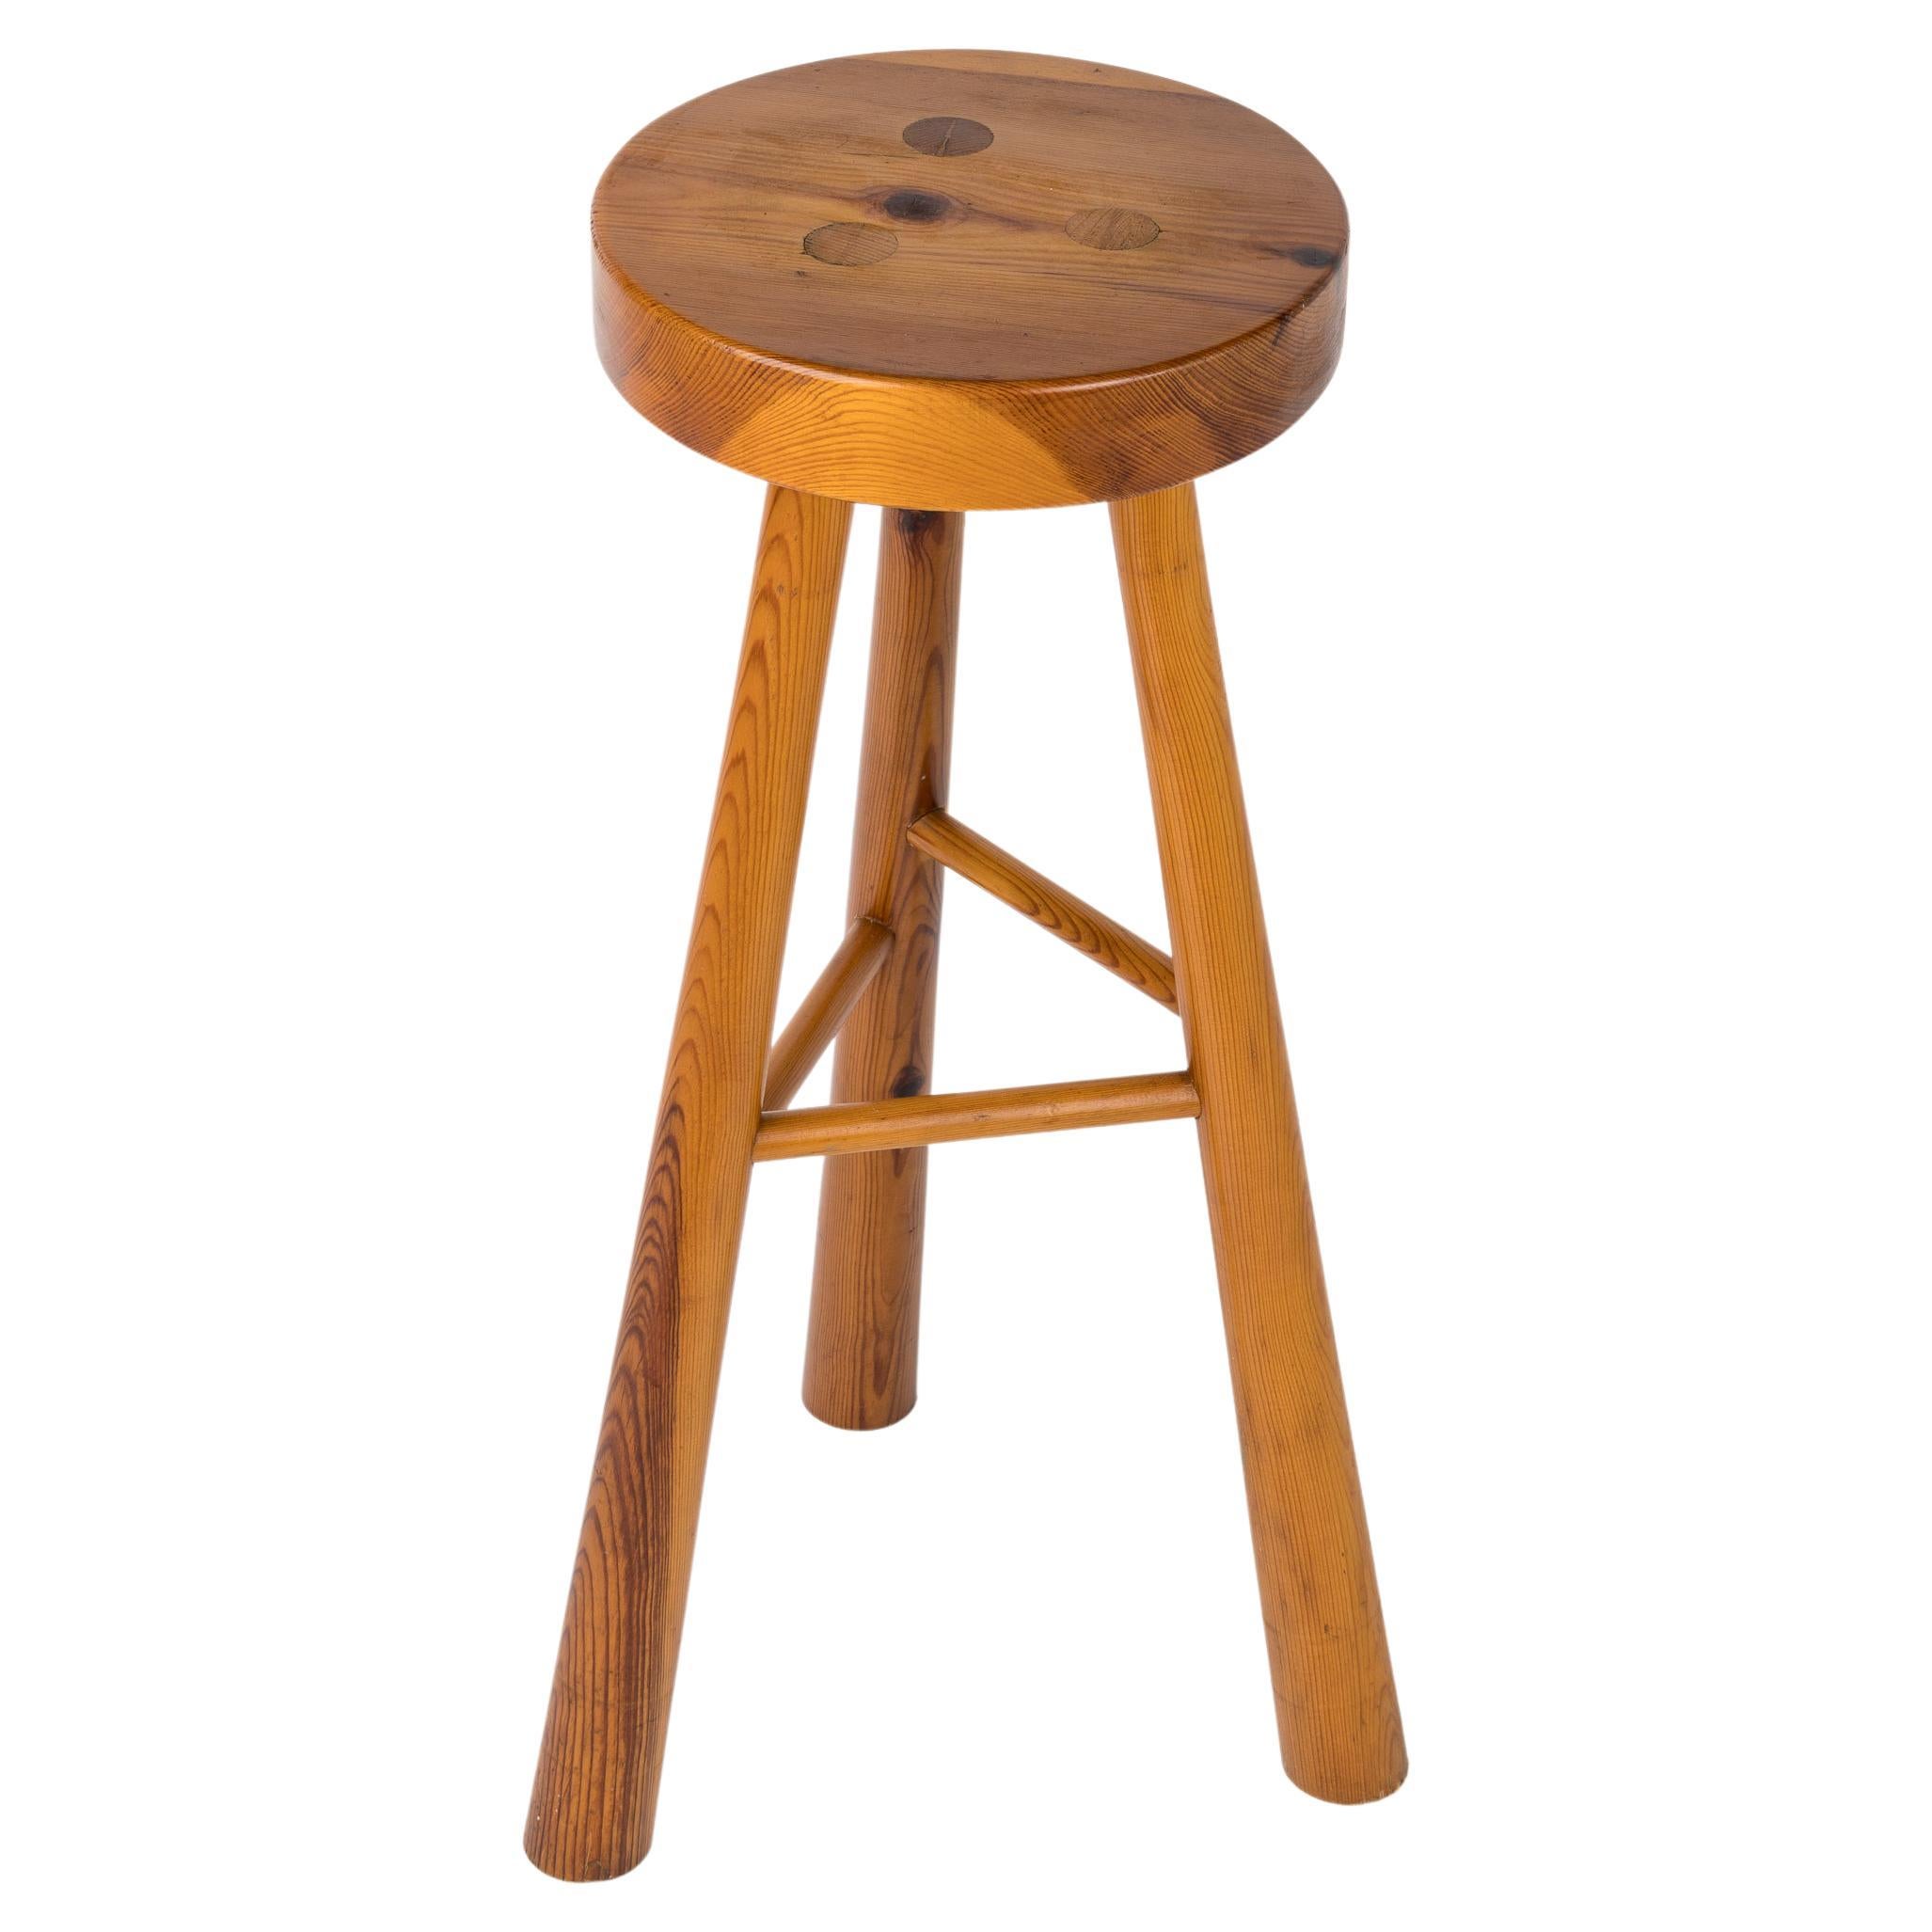 What is the best wood for bar stools?